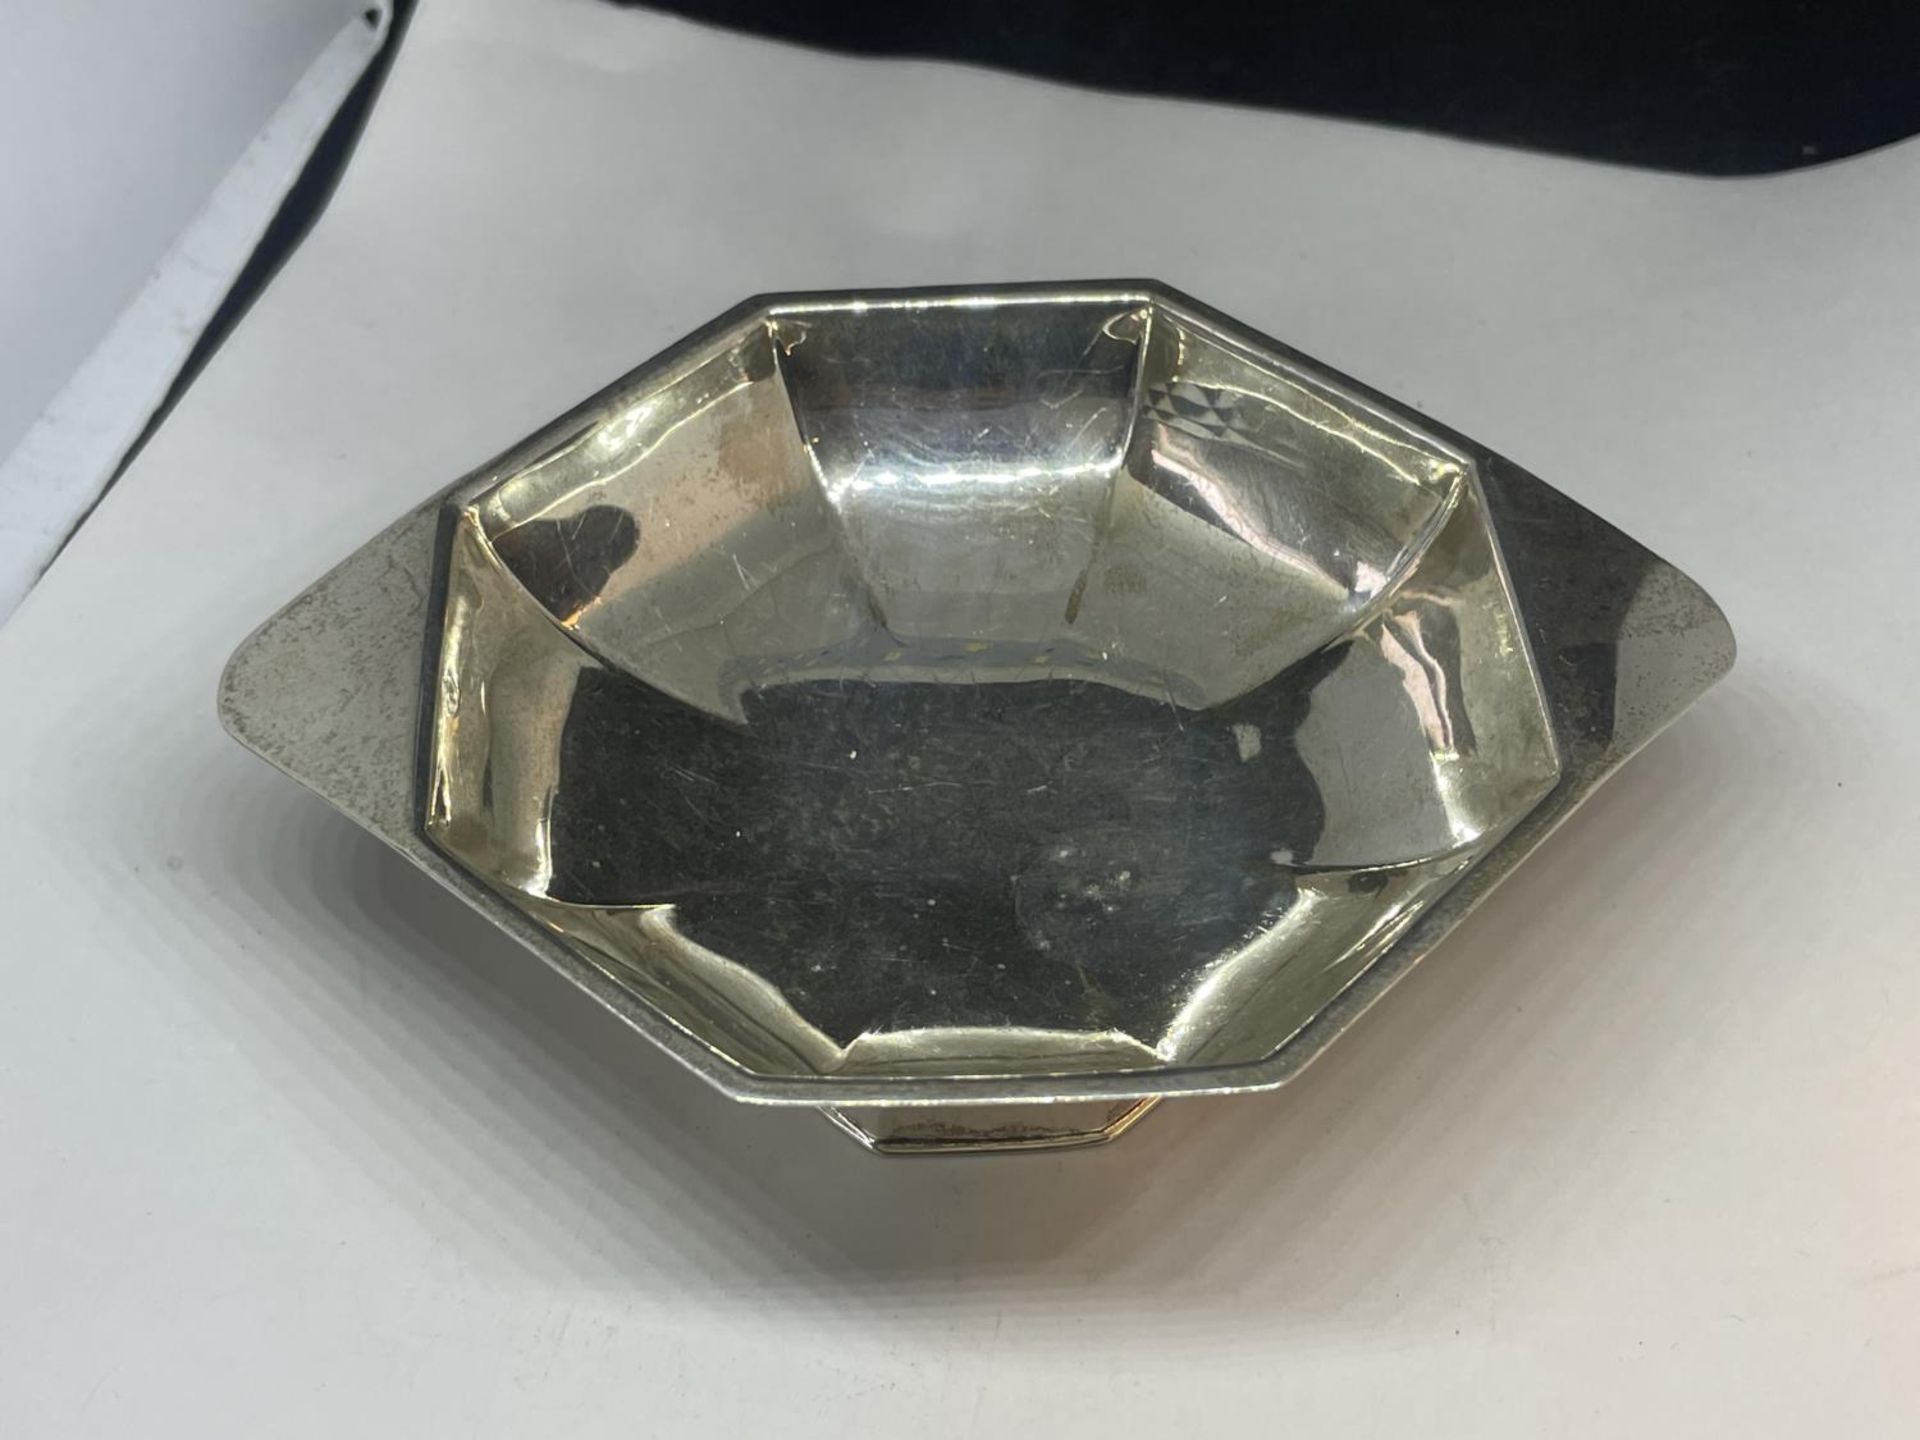 A HALLMARKED LONDON SILVER OCTAGONAL FOOTED DISH GROSS WEIGHT 107.5 GRAMS - Image 2 of 4